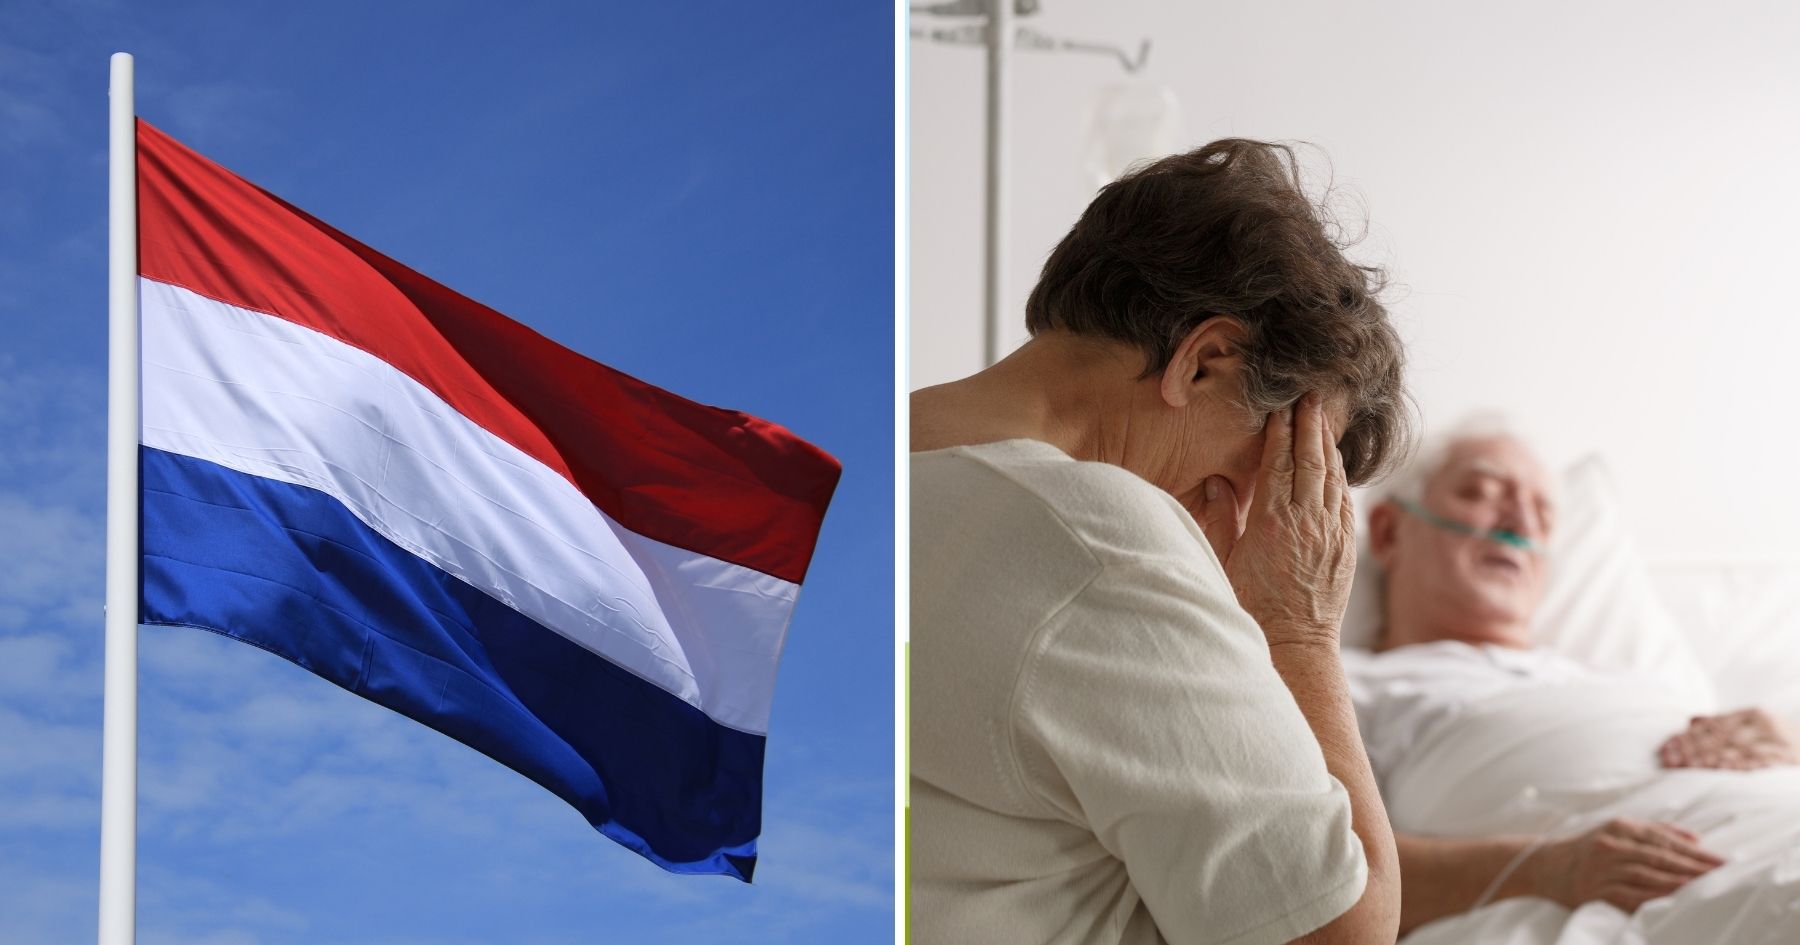 Netherlands had record number of euthanasia procedures in 2020